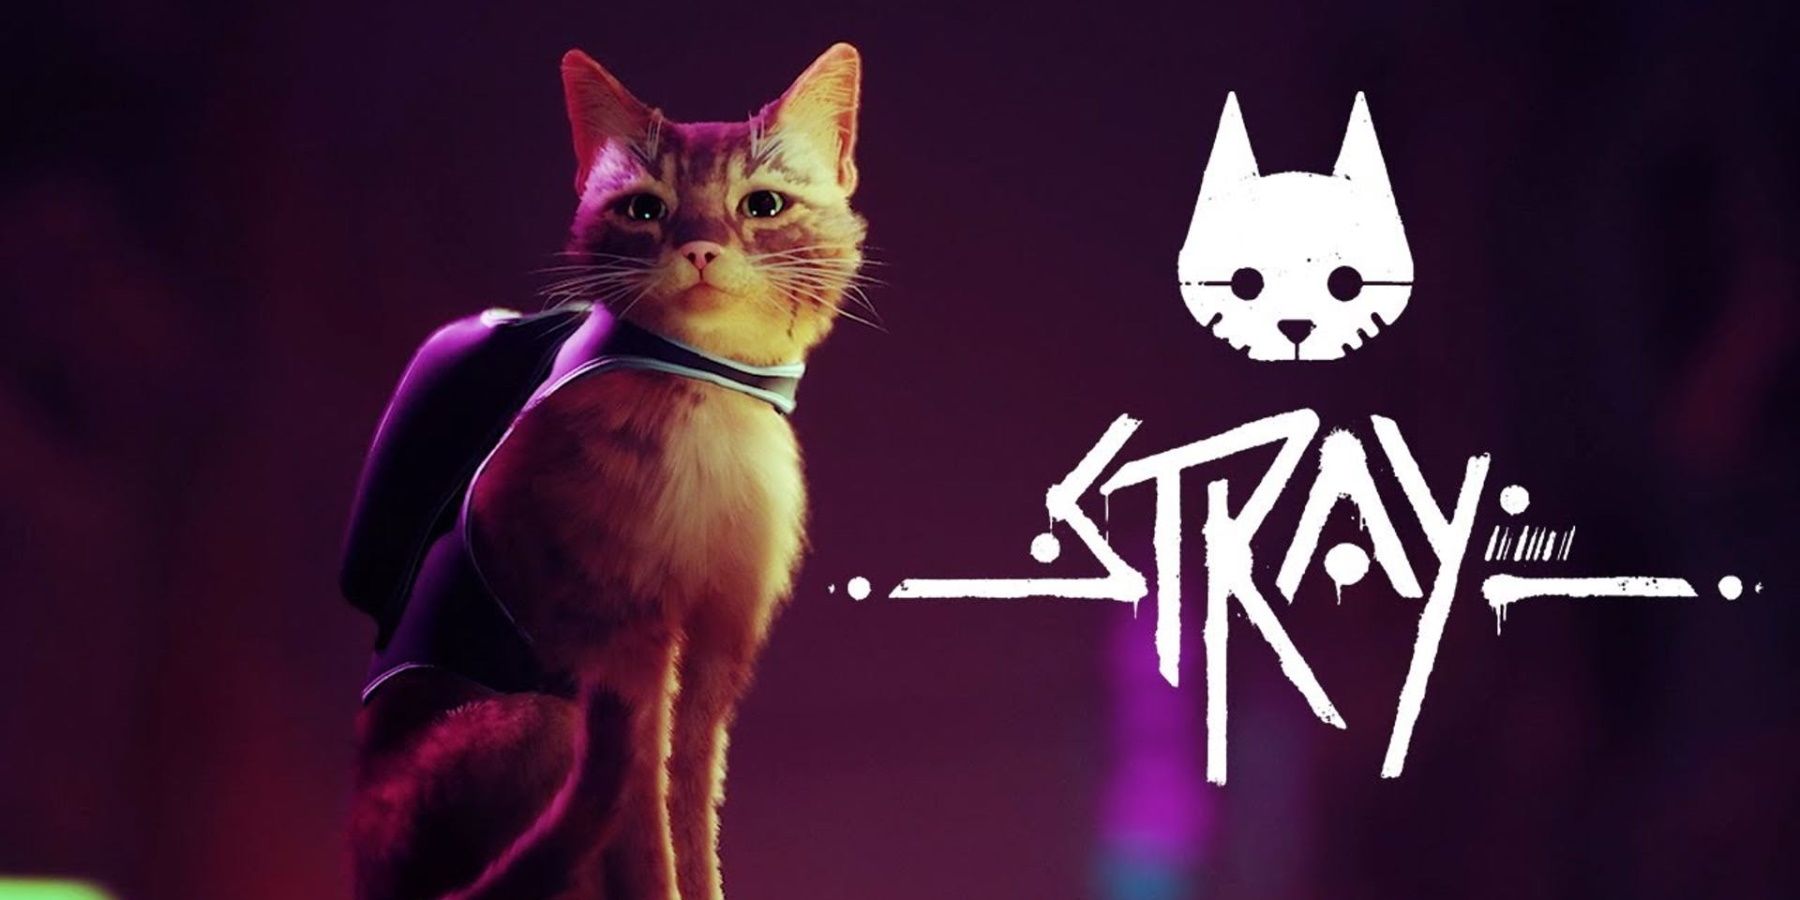 stray-playstation-cat-game-release-date-leaked